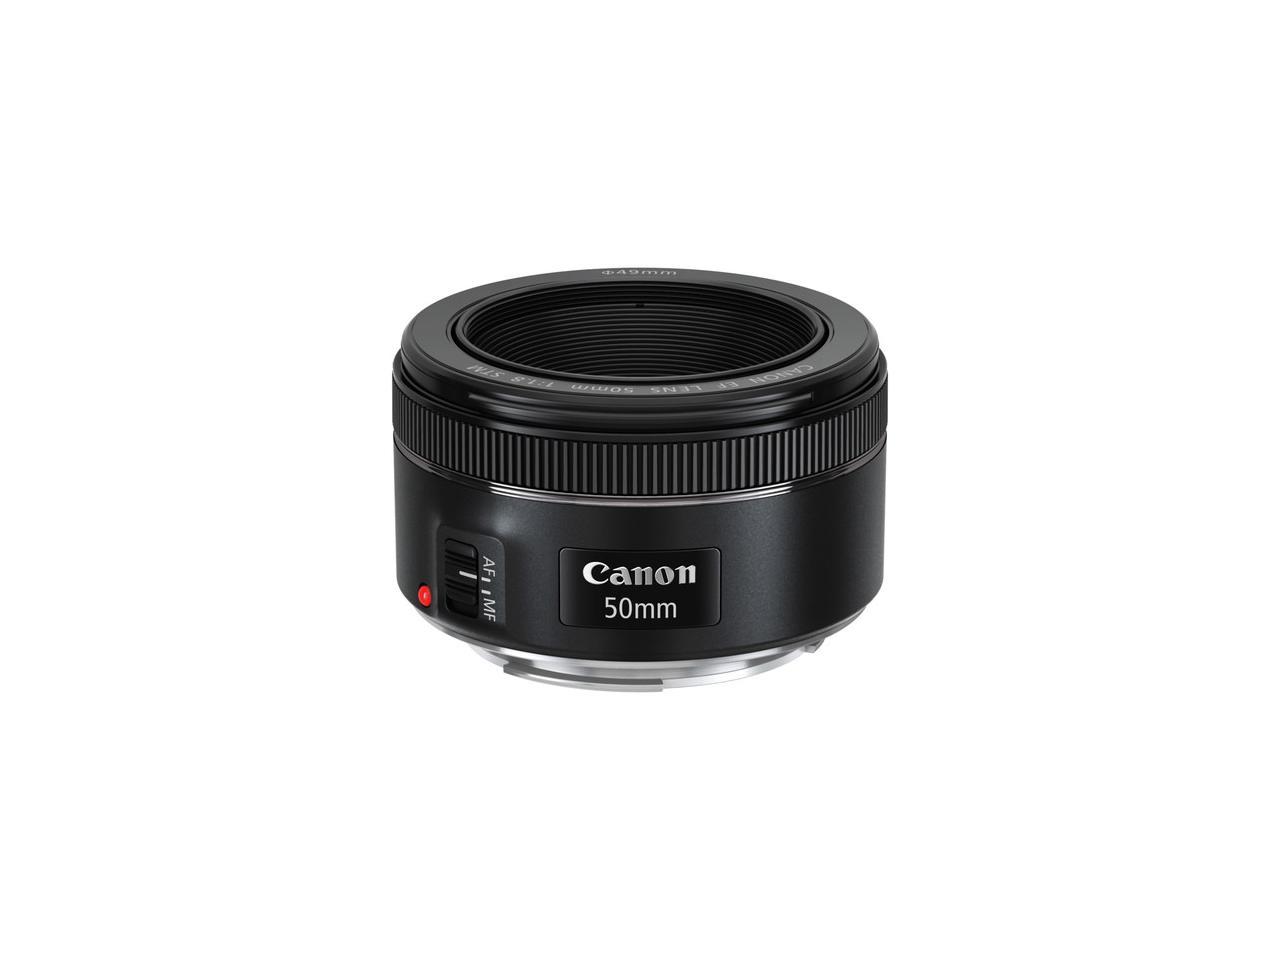 Canon 50mm f/1.8 Fixed Focal Length Lens for Canon EF